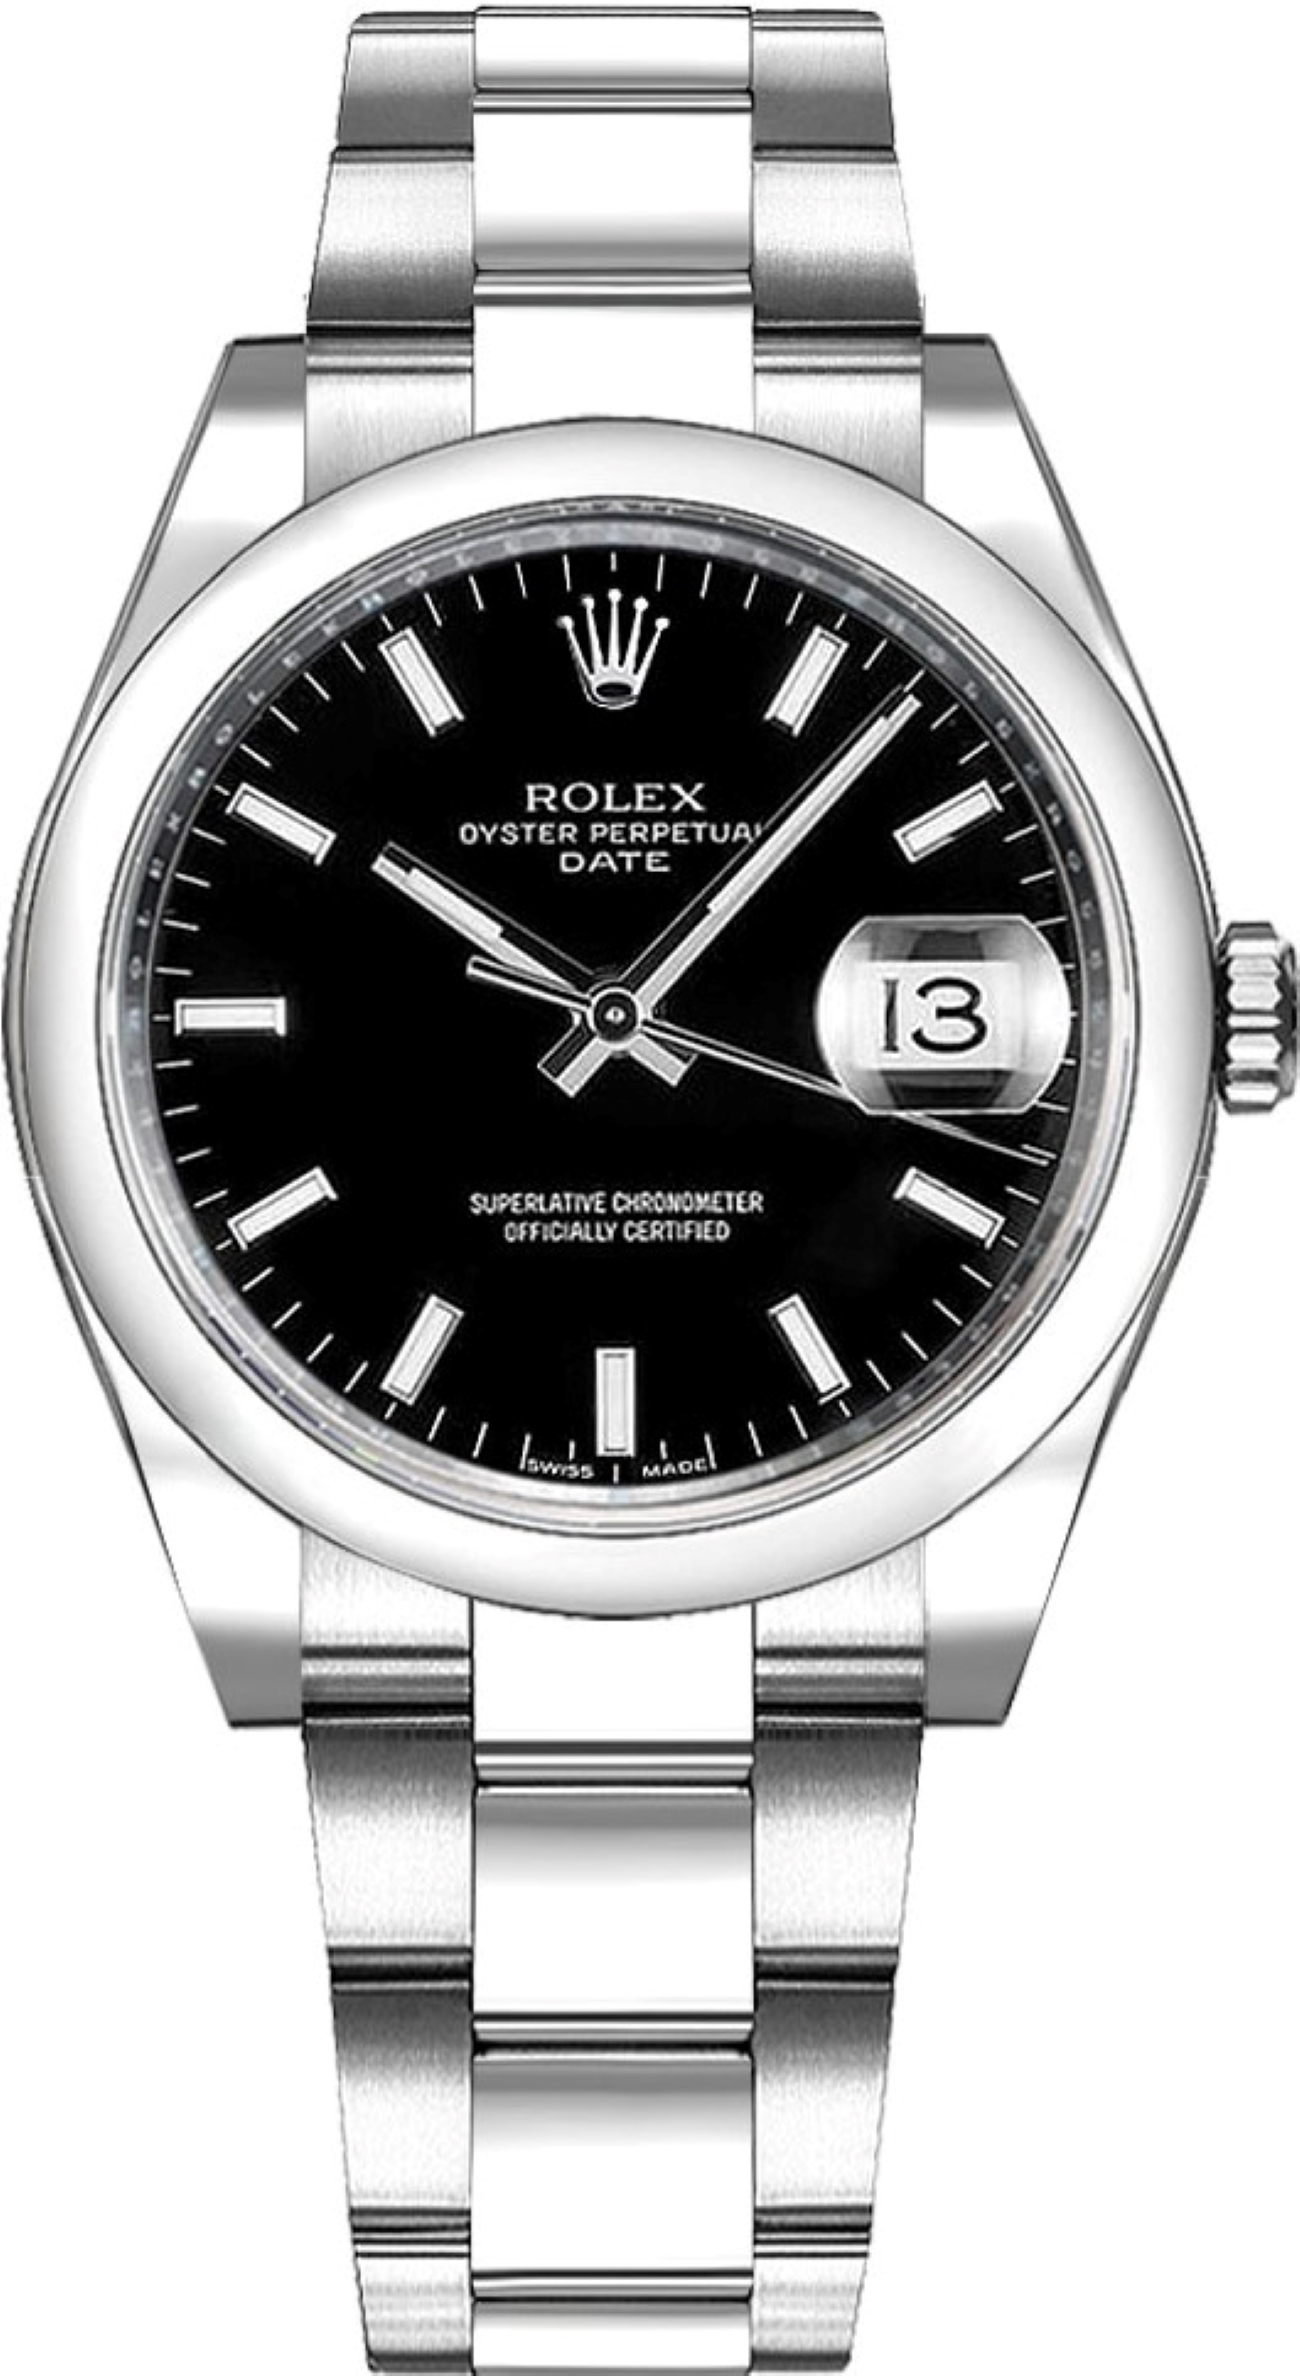 ROLEX OYSTER PERPETUAL DATE 34MM BLACK DIAL STEEL AUTOMATIC REF: 115200